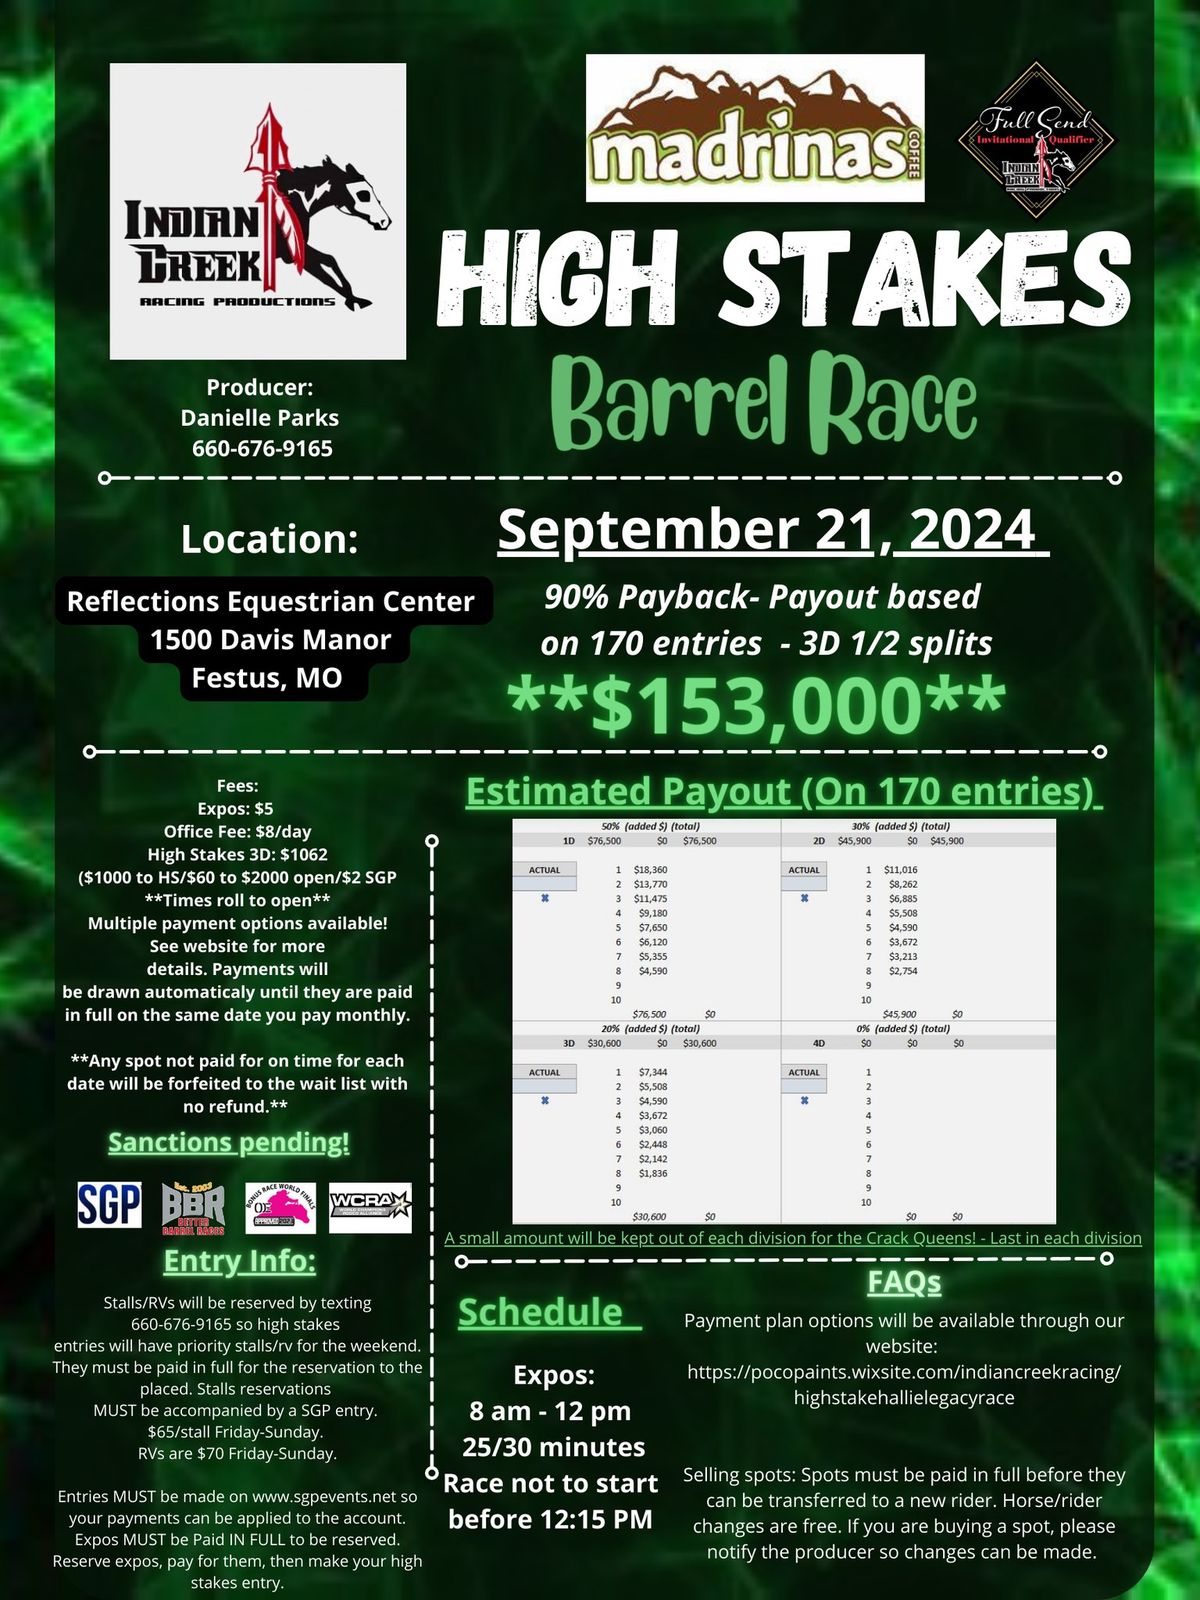 ICRP High Stakes 3D Race & Open $2000 added 5D Jackpot